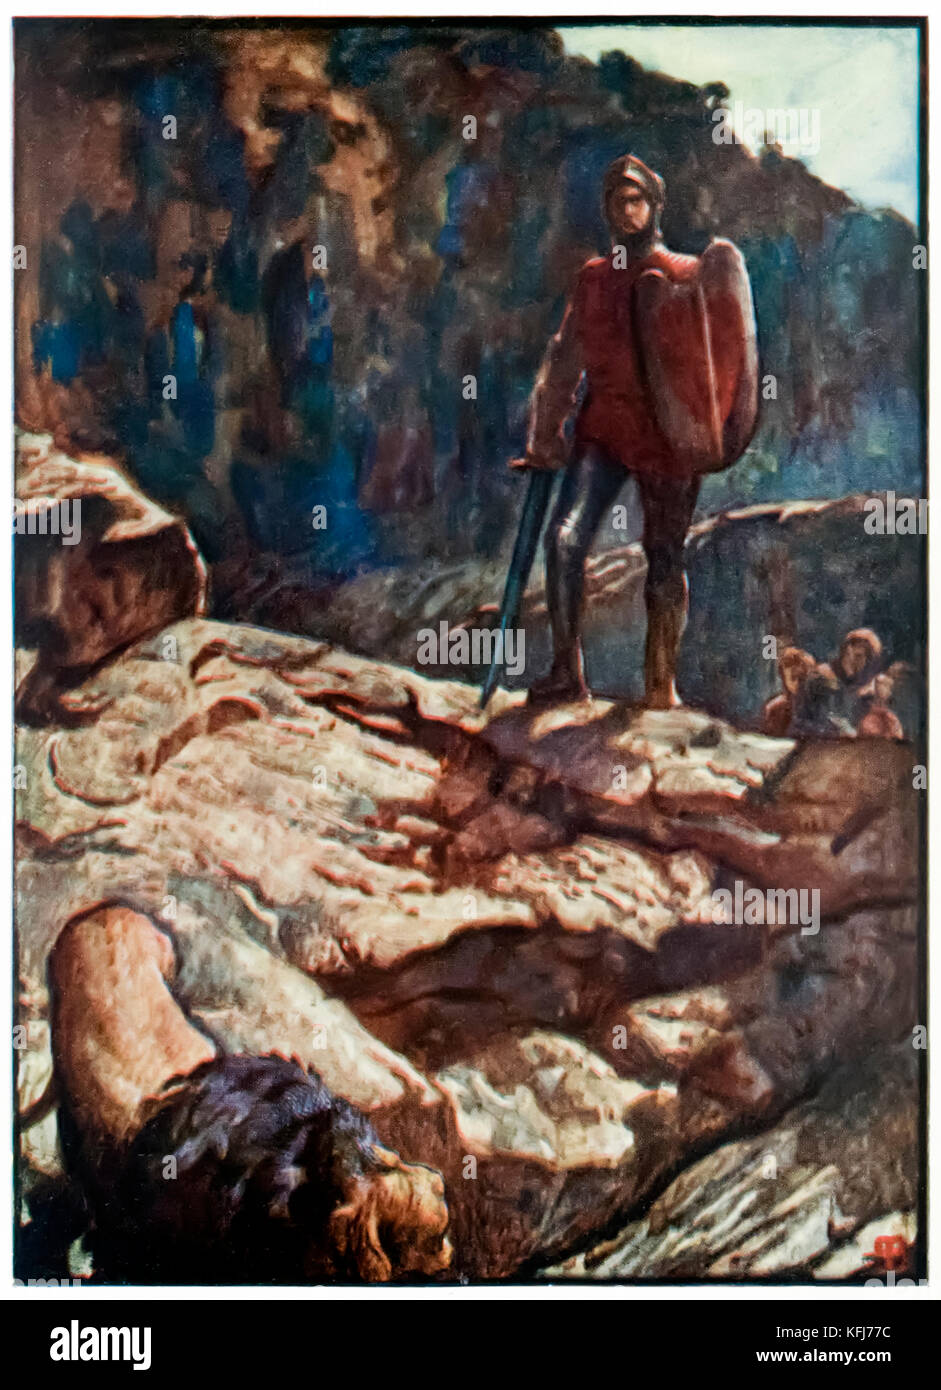 “Greatheart drives back the lion” from ‘The Pilgrim’s Progress From This World, To That Which Is To Come’ by John Bunyan (1628-1688). Illustration by Byam Shaw (1872-1919). See more information below. Stock Photo